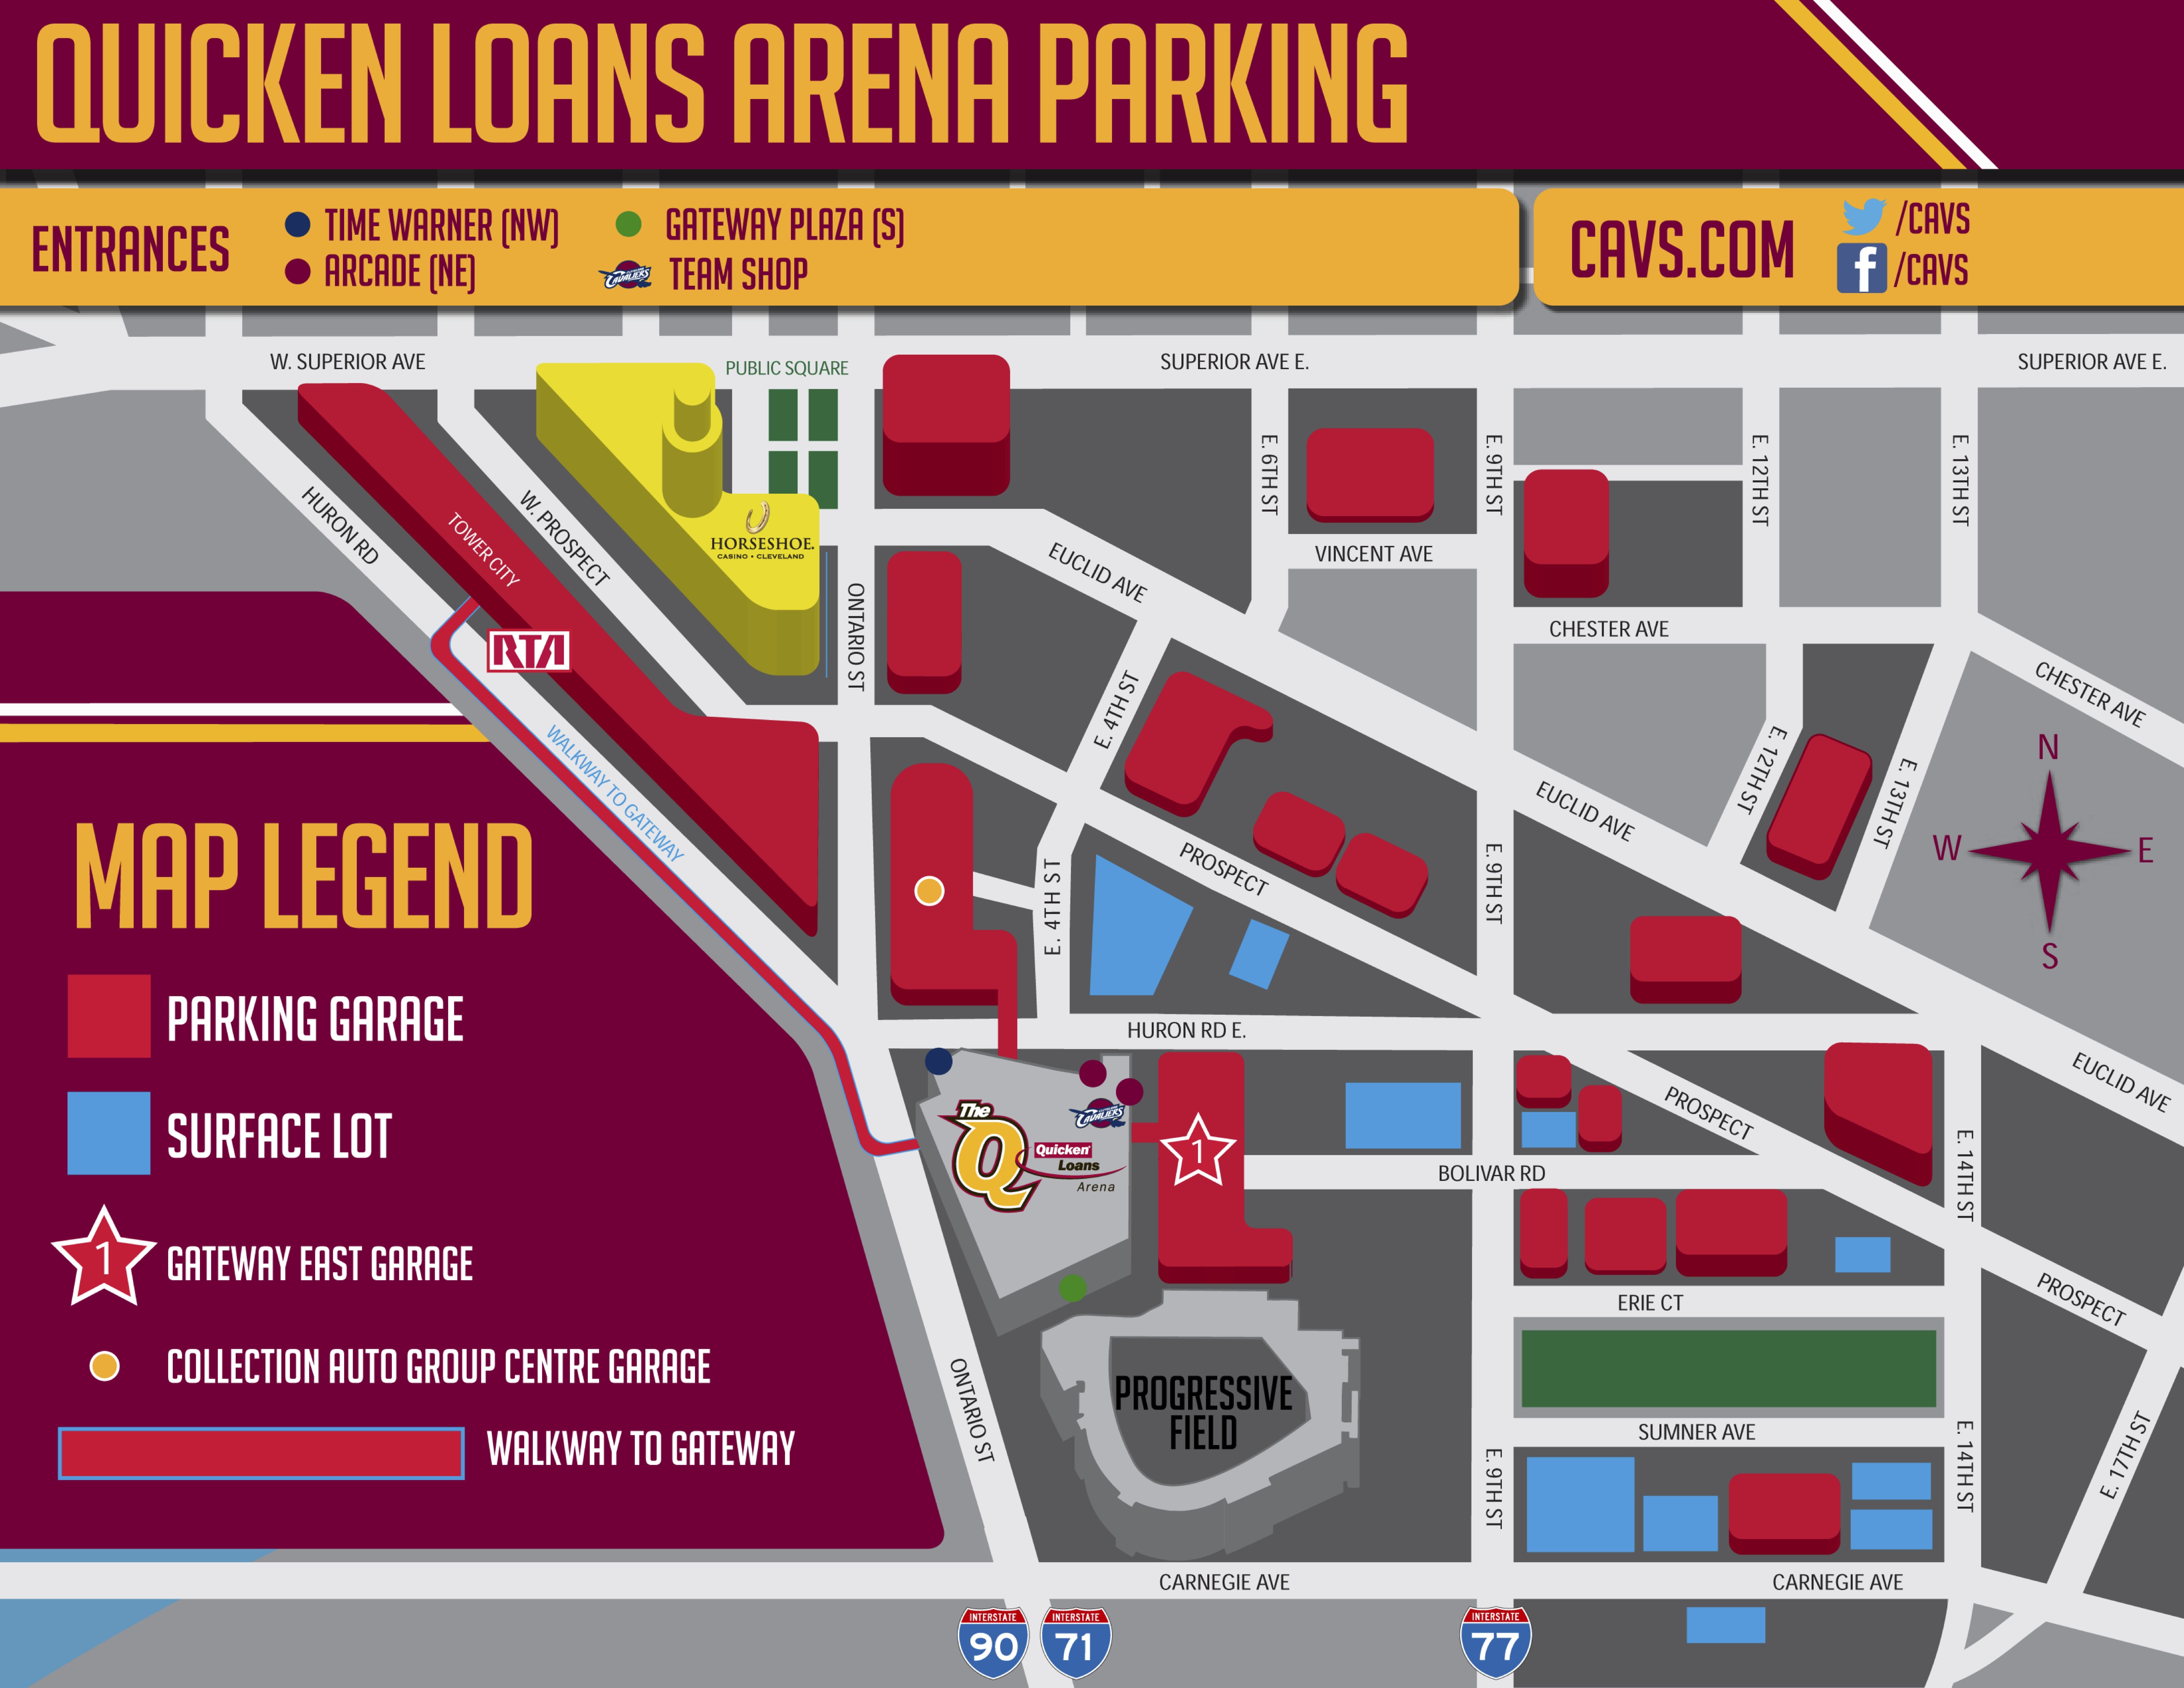 Quicken Loans Arena Parking Guide: Maps, Rates, Tips | SPG